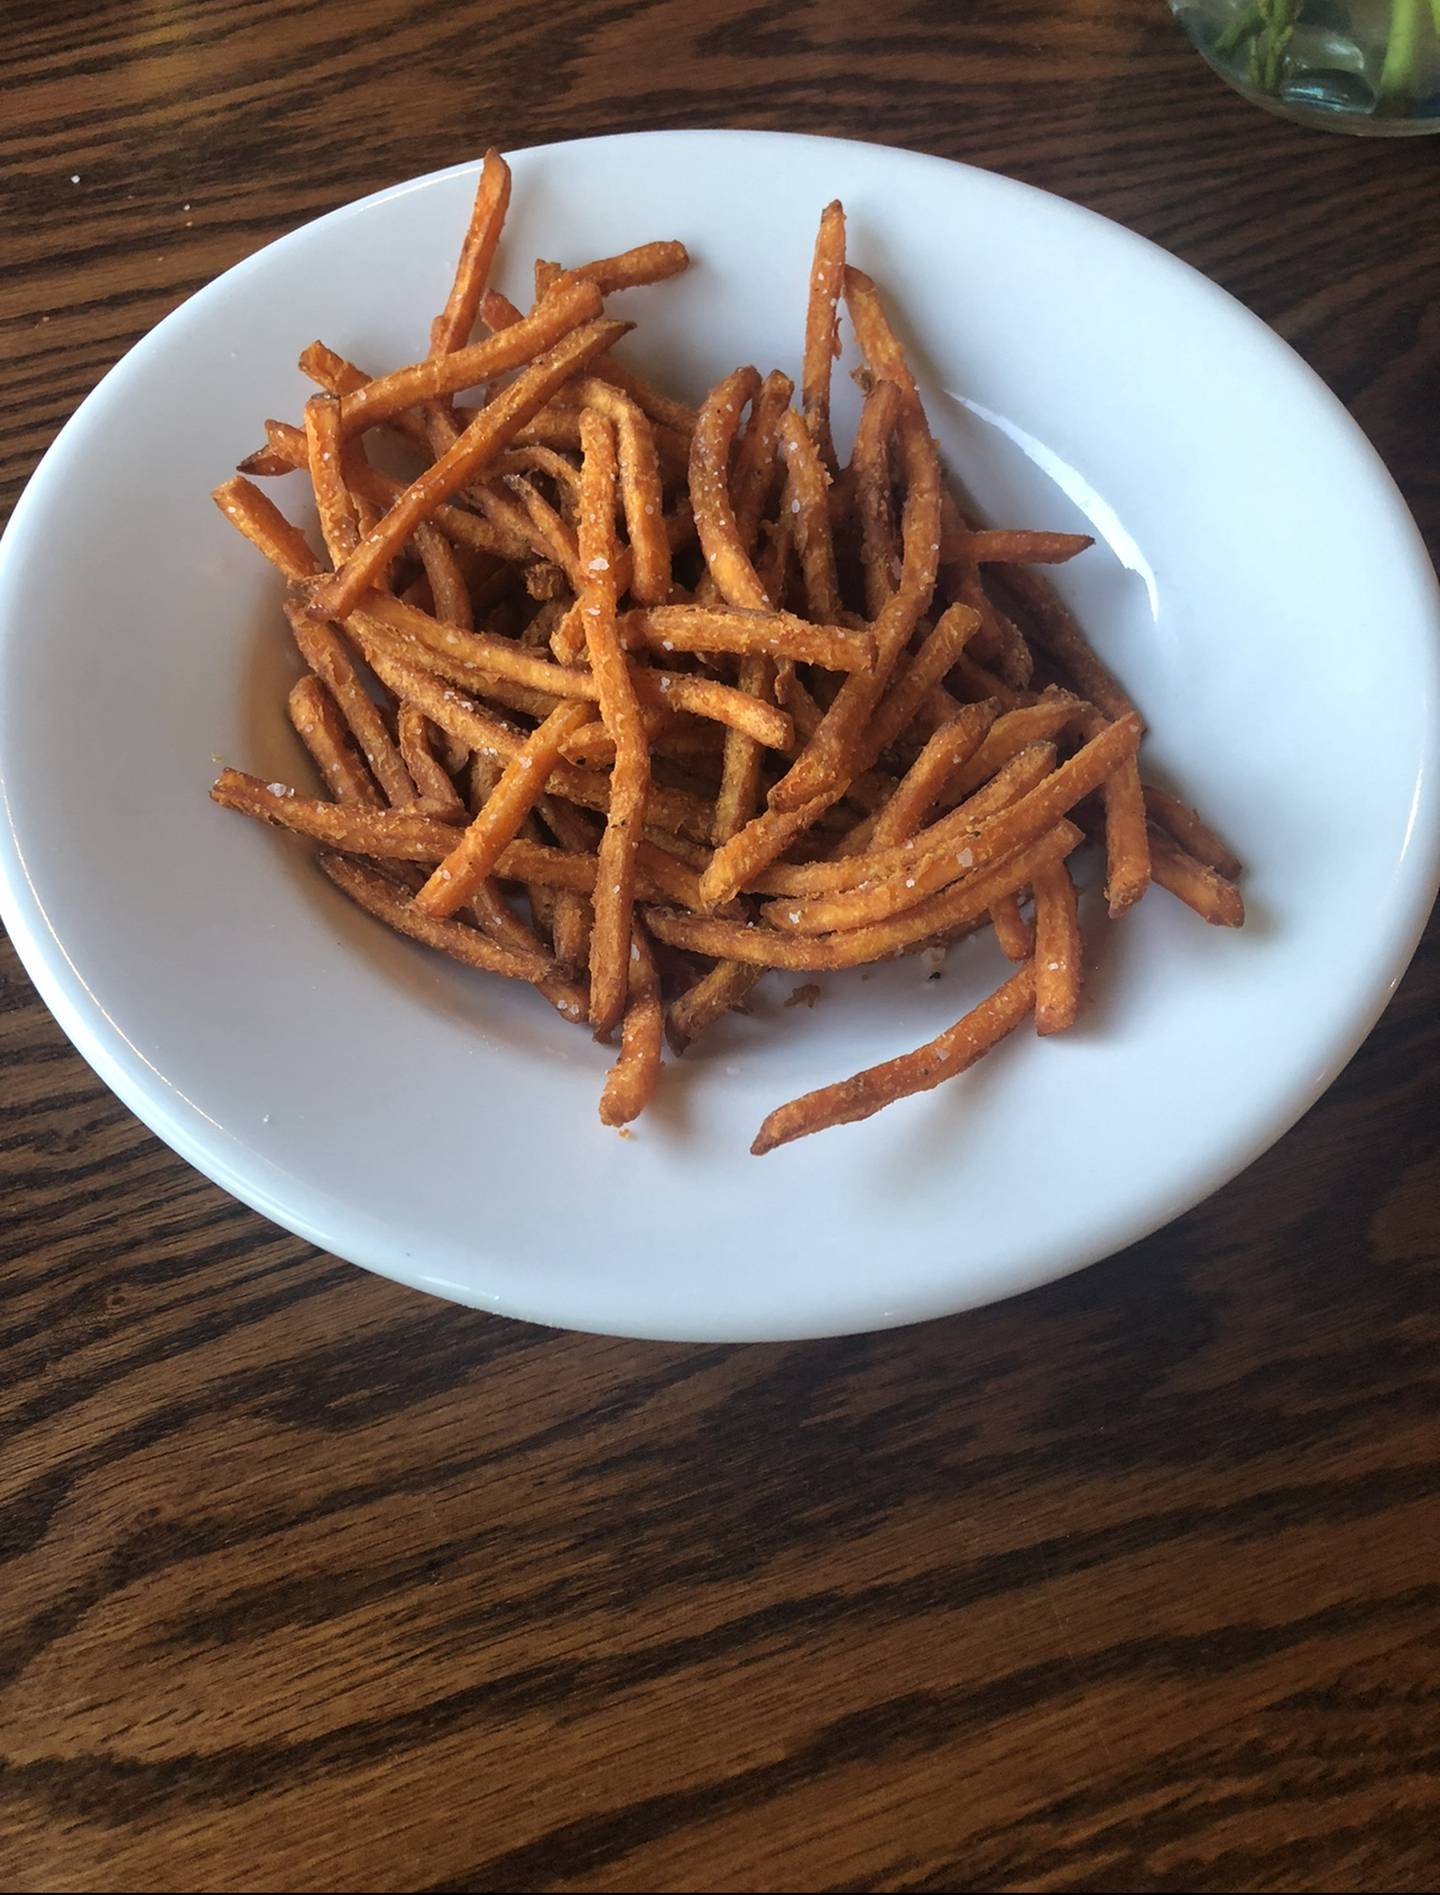 A side of sweet potato fries from Bleuroot in West Dundee.